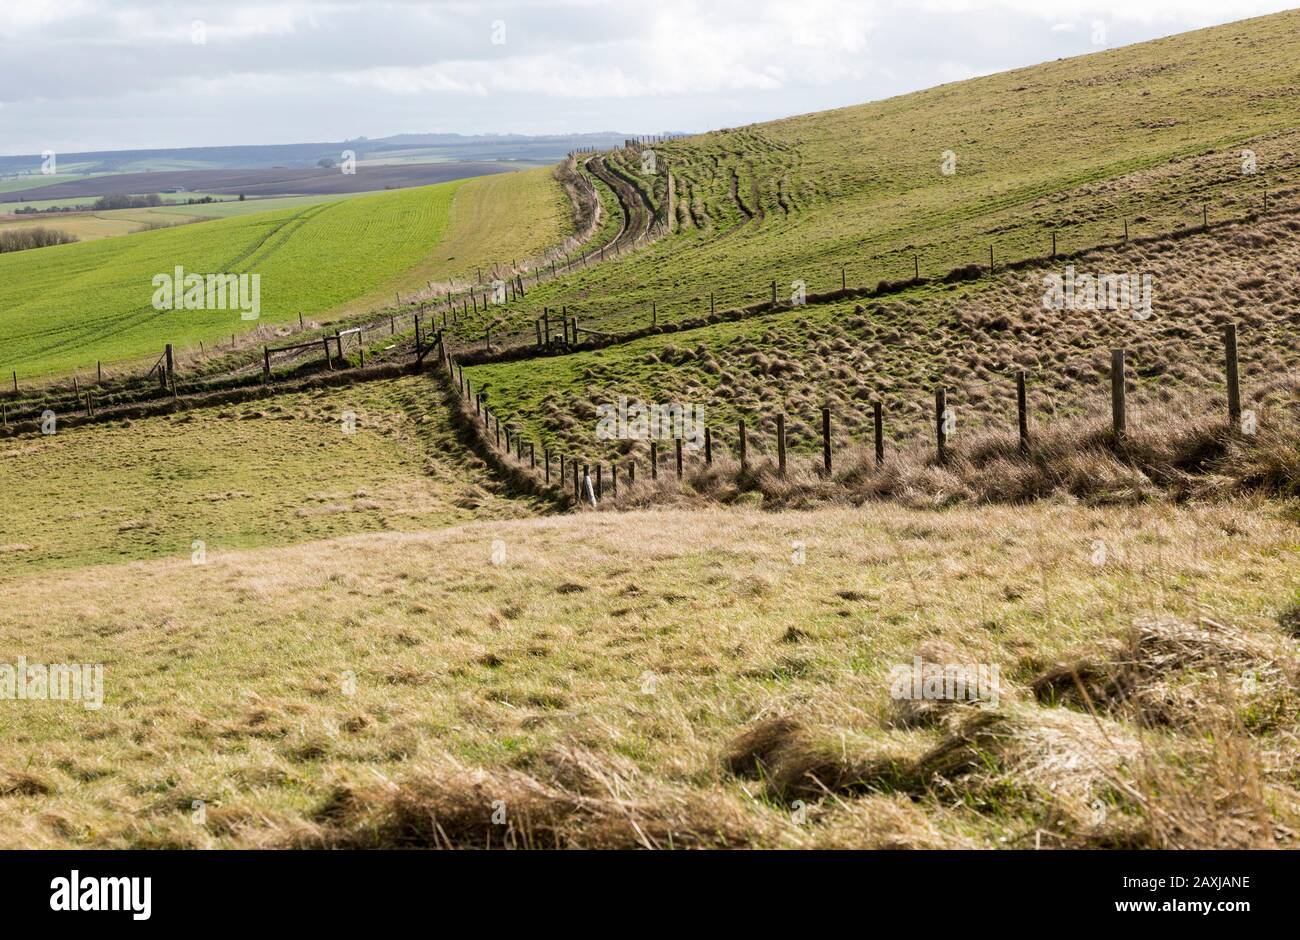 Undulating countryside upland chalk landscape in winter downland area of North Wessex Downs, near Cherhill, Wiltshire, England, UK Stock Photo